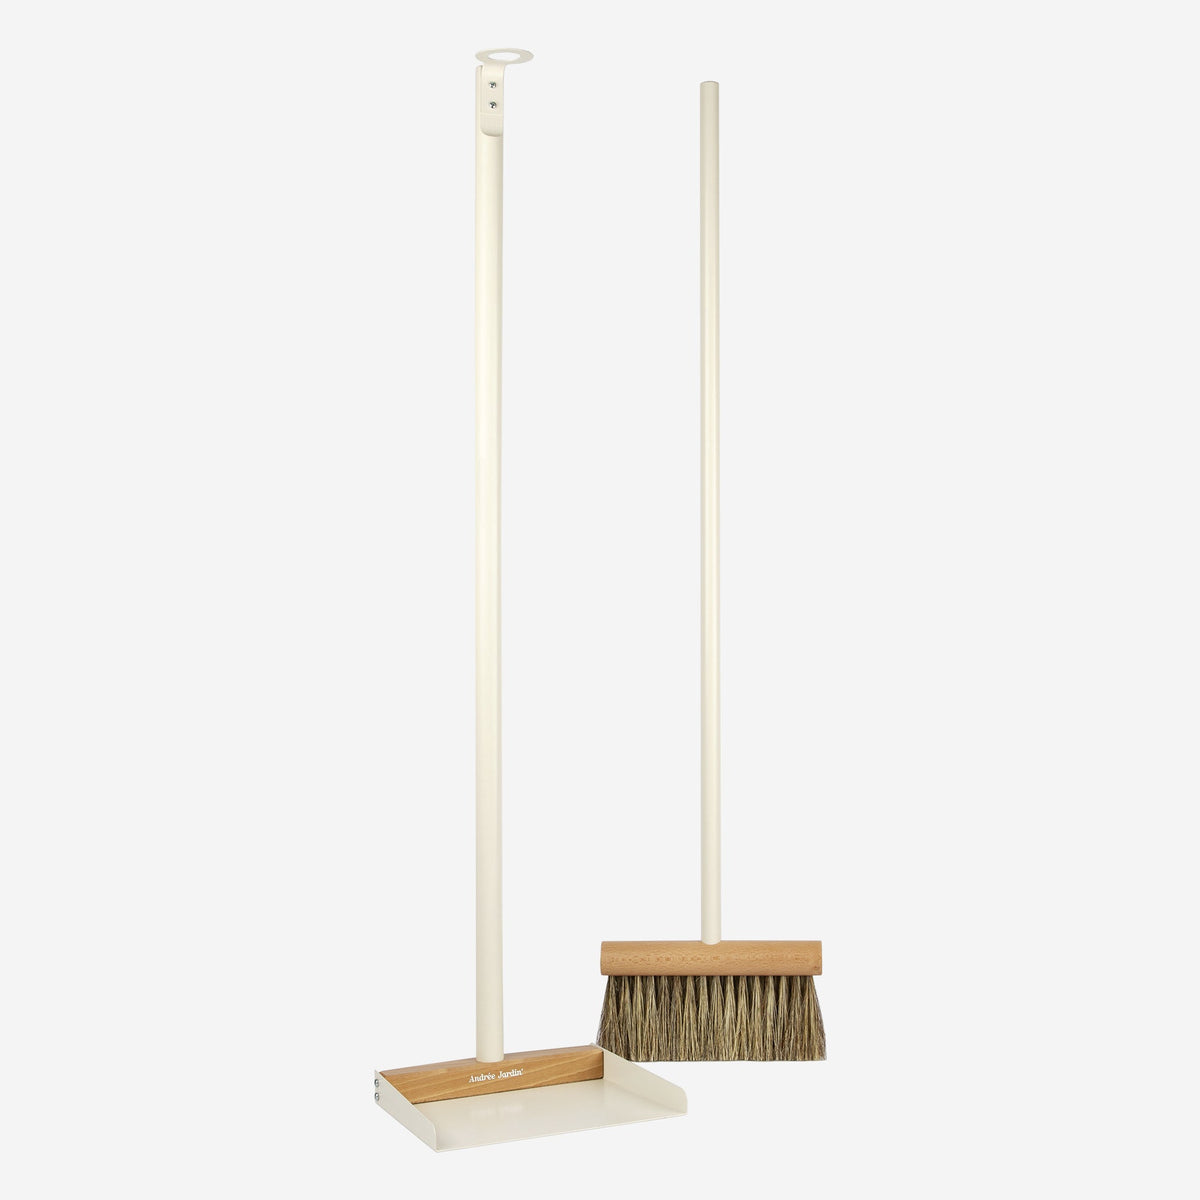 Andrée Jardin Mr. and Mrs. Clynk Table Crumb Brush and Dustpan